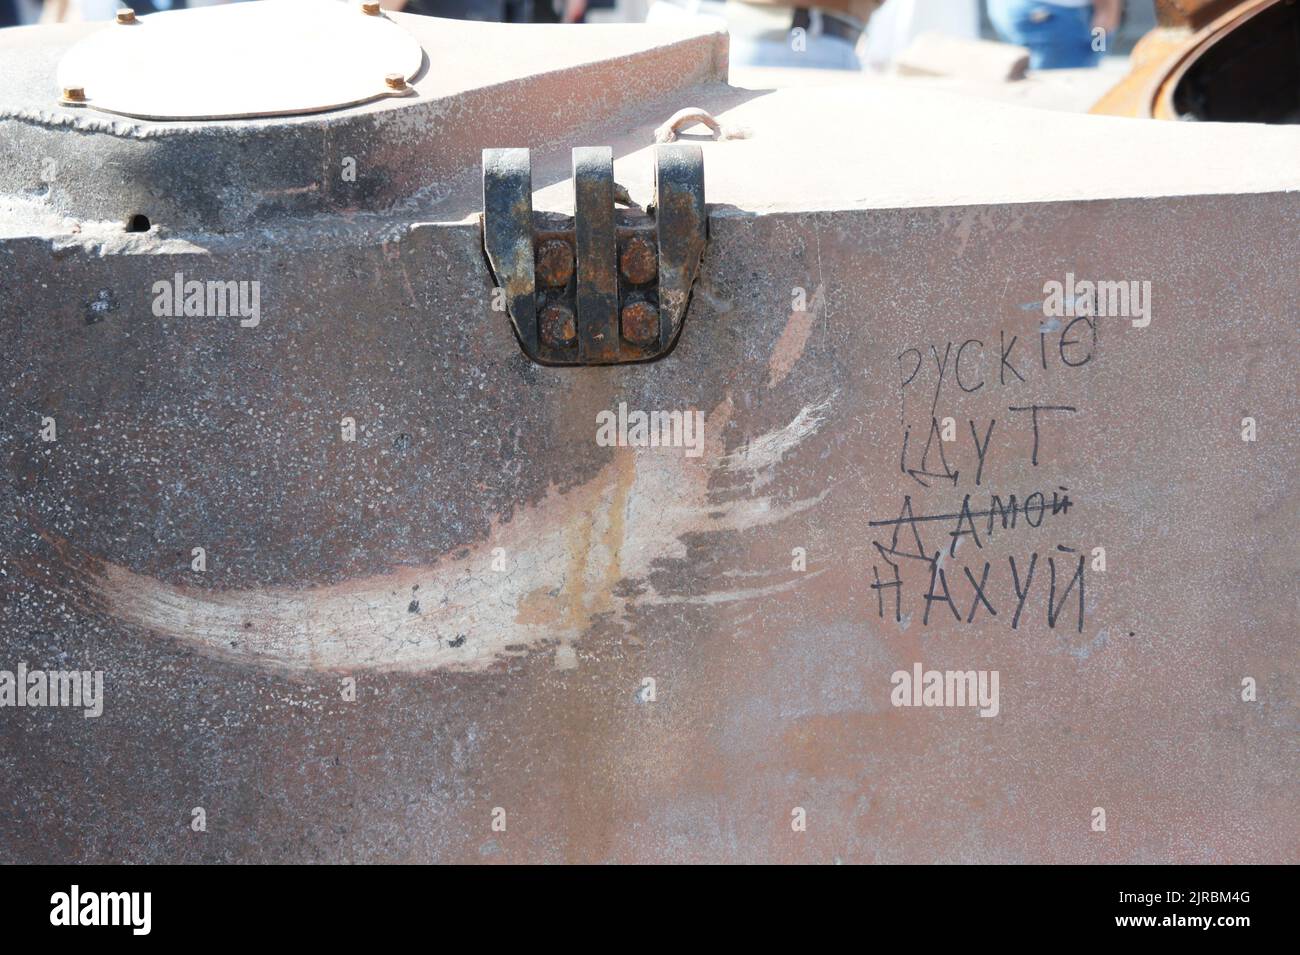 Kyiv, Kyiv Ukraine, August 21 2022: Sign on tank. Russian military equipment destroyed. Display for Independence Day parade on Khreshchatyk street Stock Photo